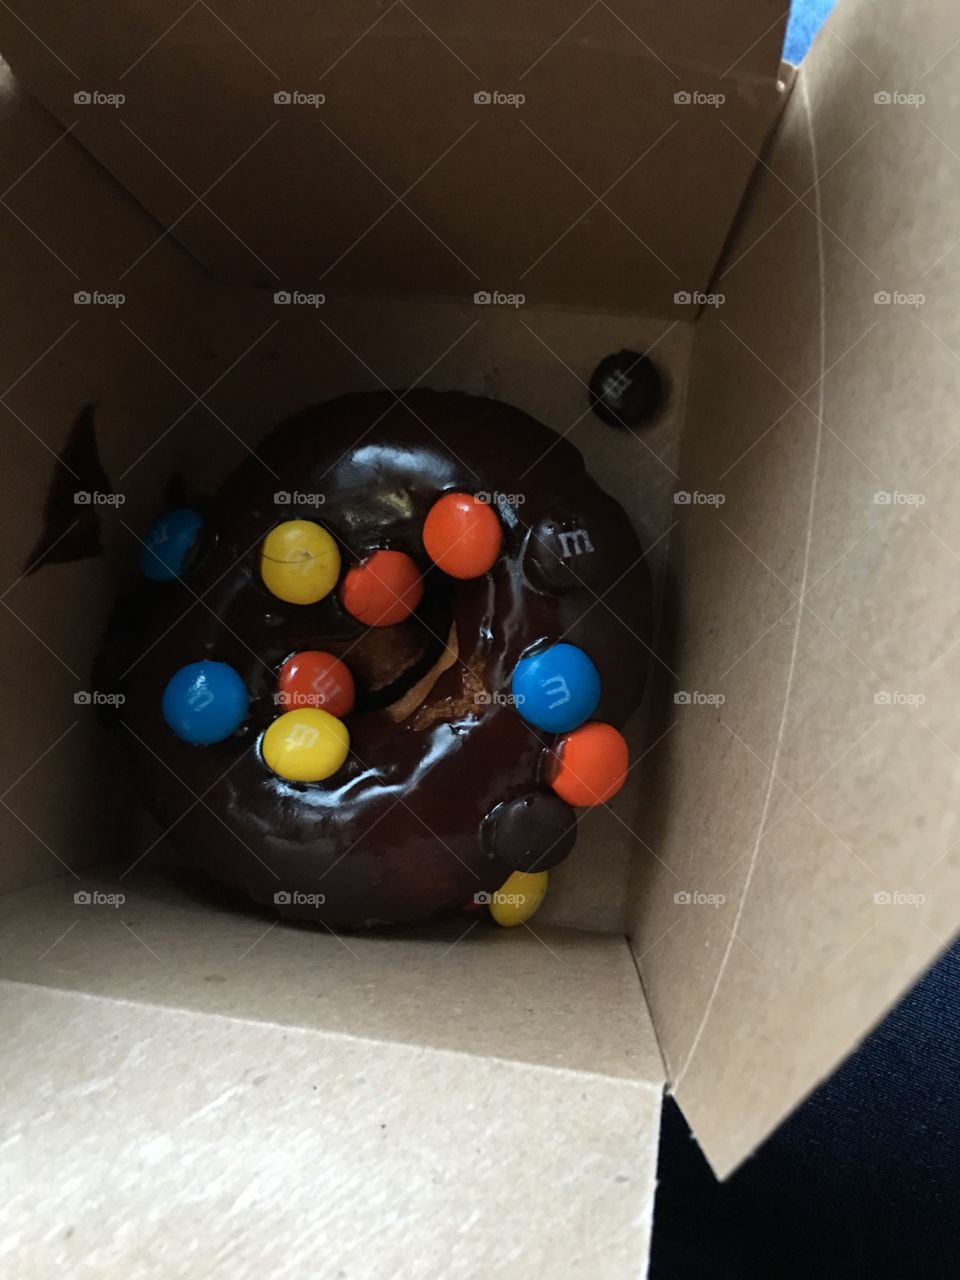 Donut in a box